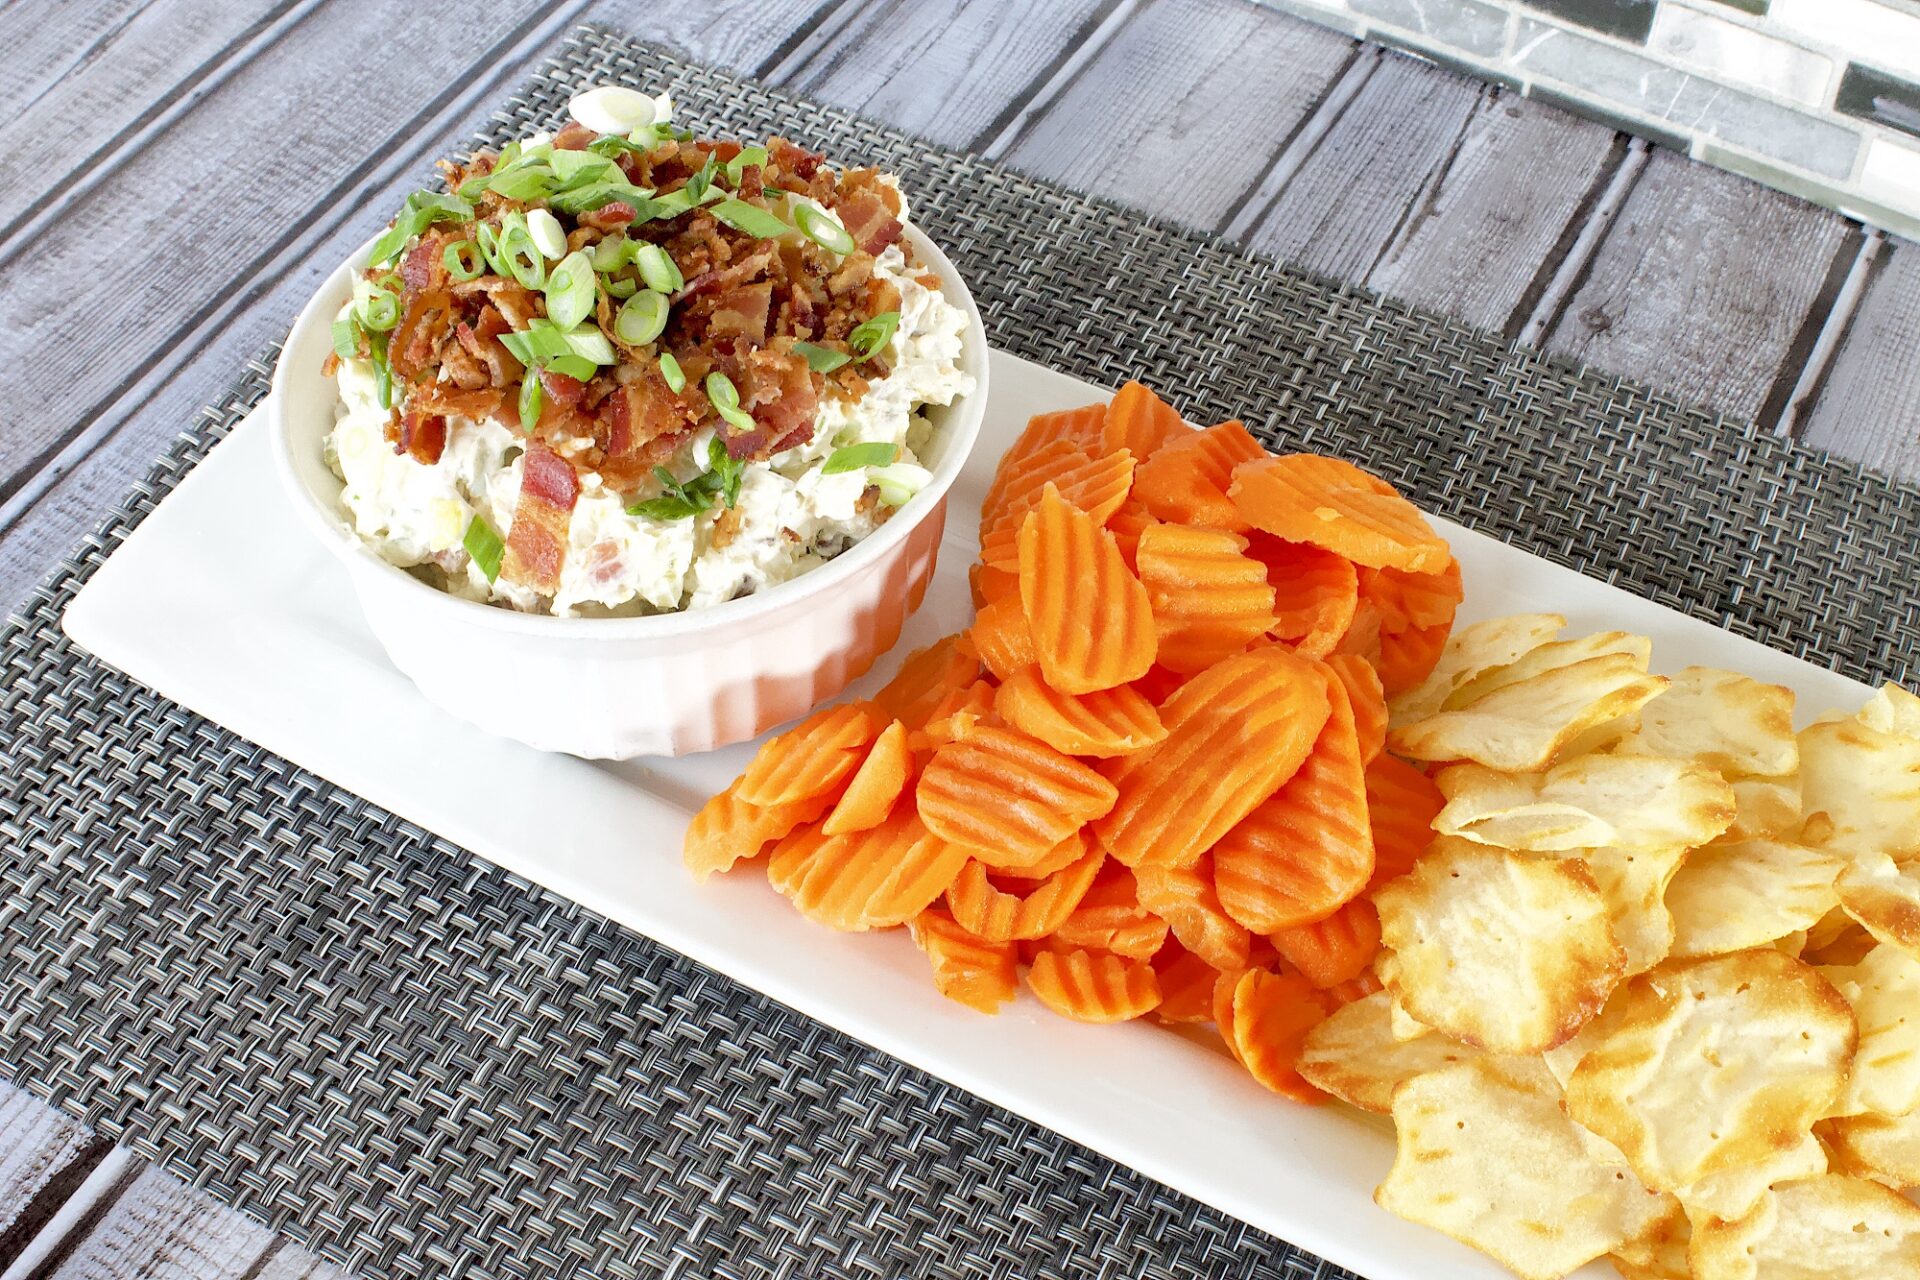 dill pickle dip in a bowl next to carrots and chips.